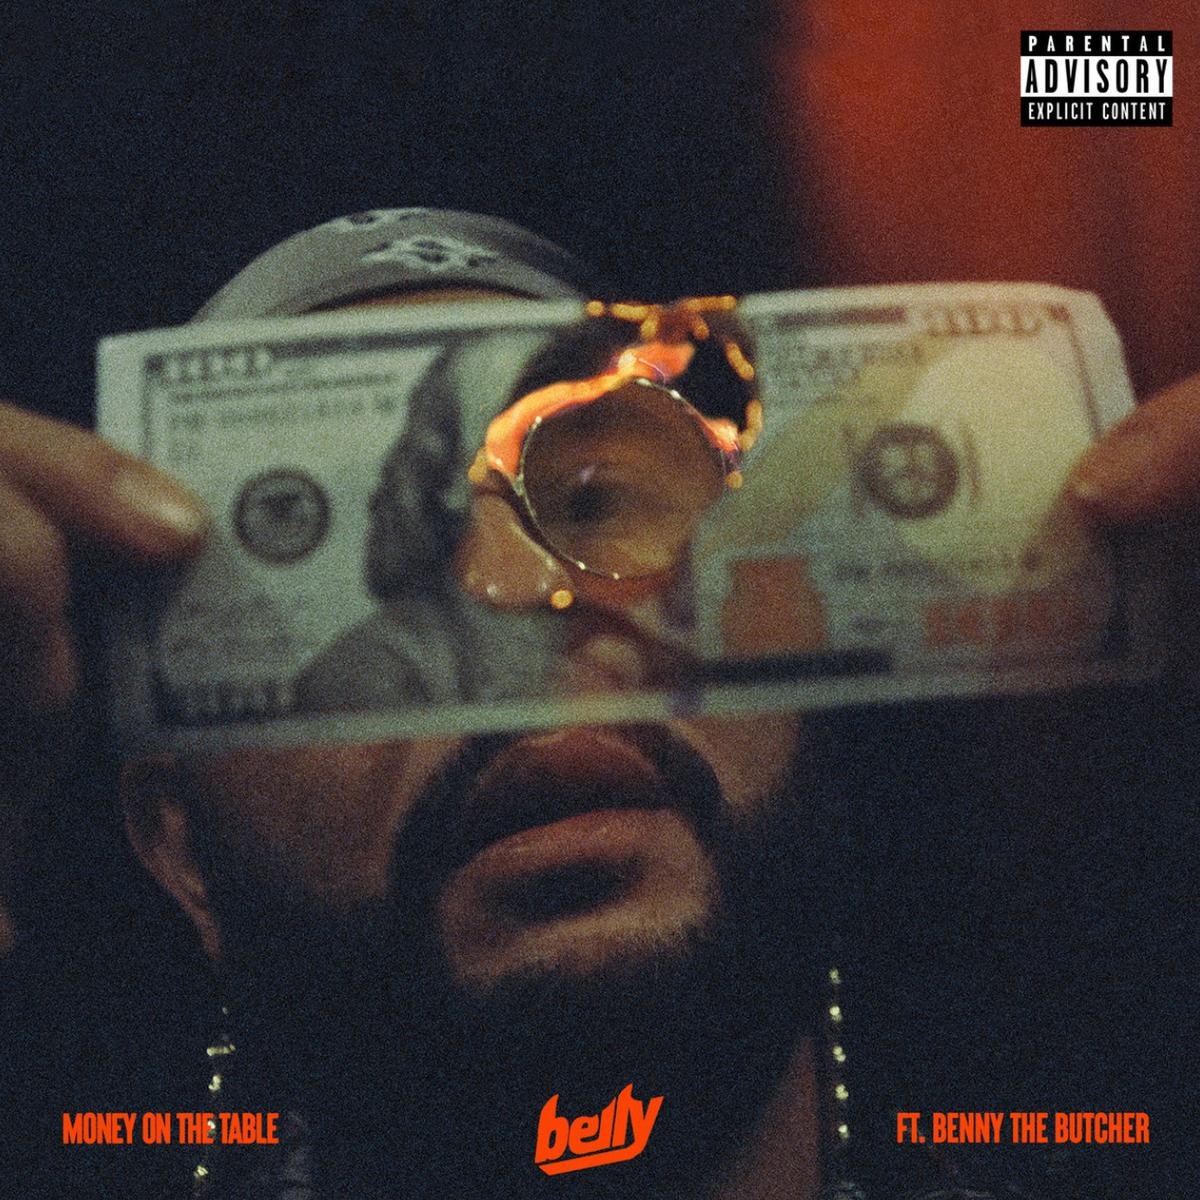 Belly & Benny The Butcher Trade Verses On “Money On The Table”